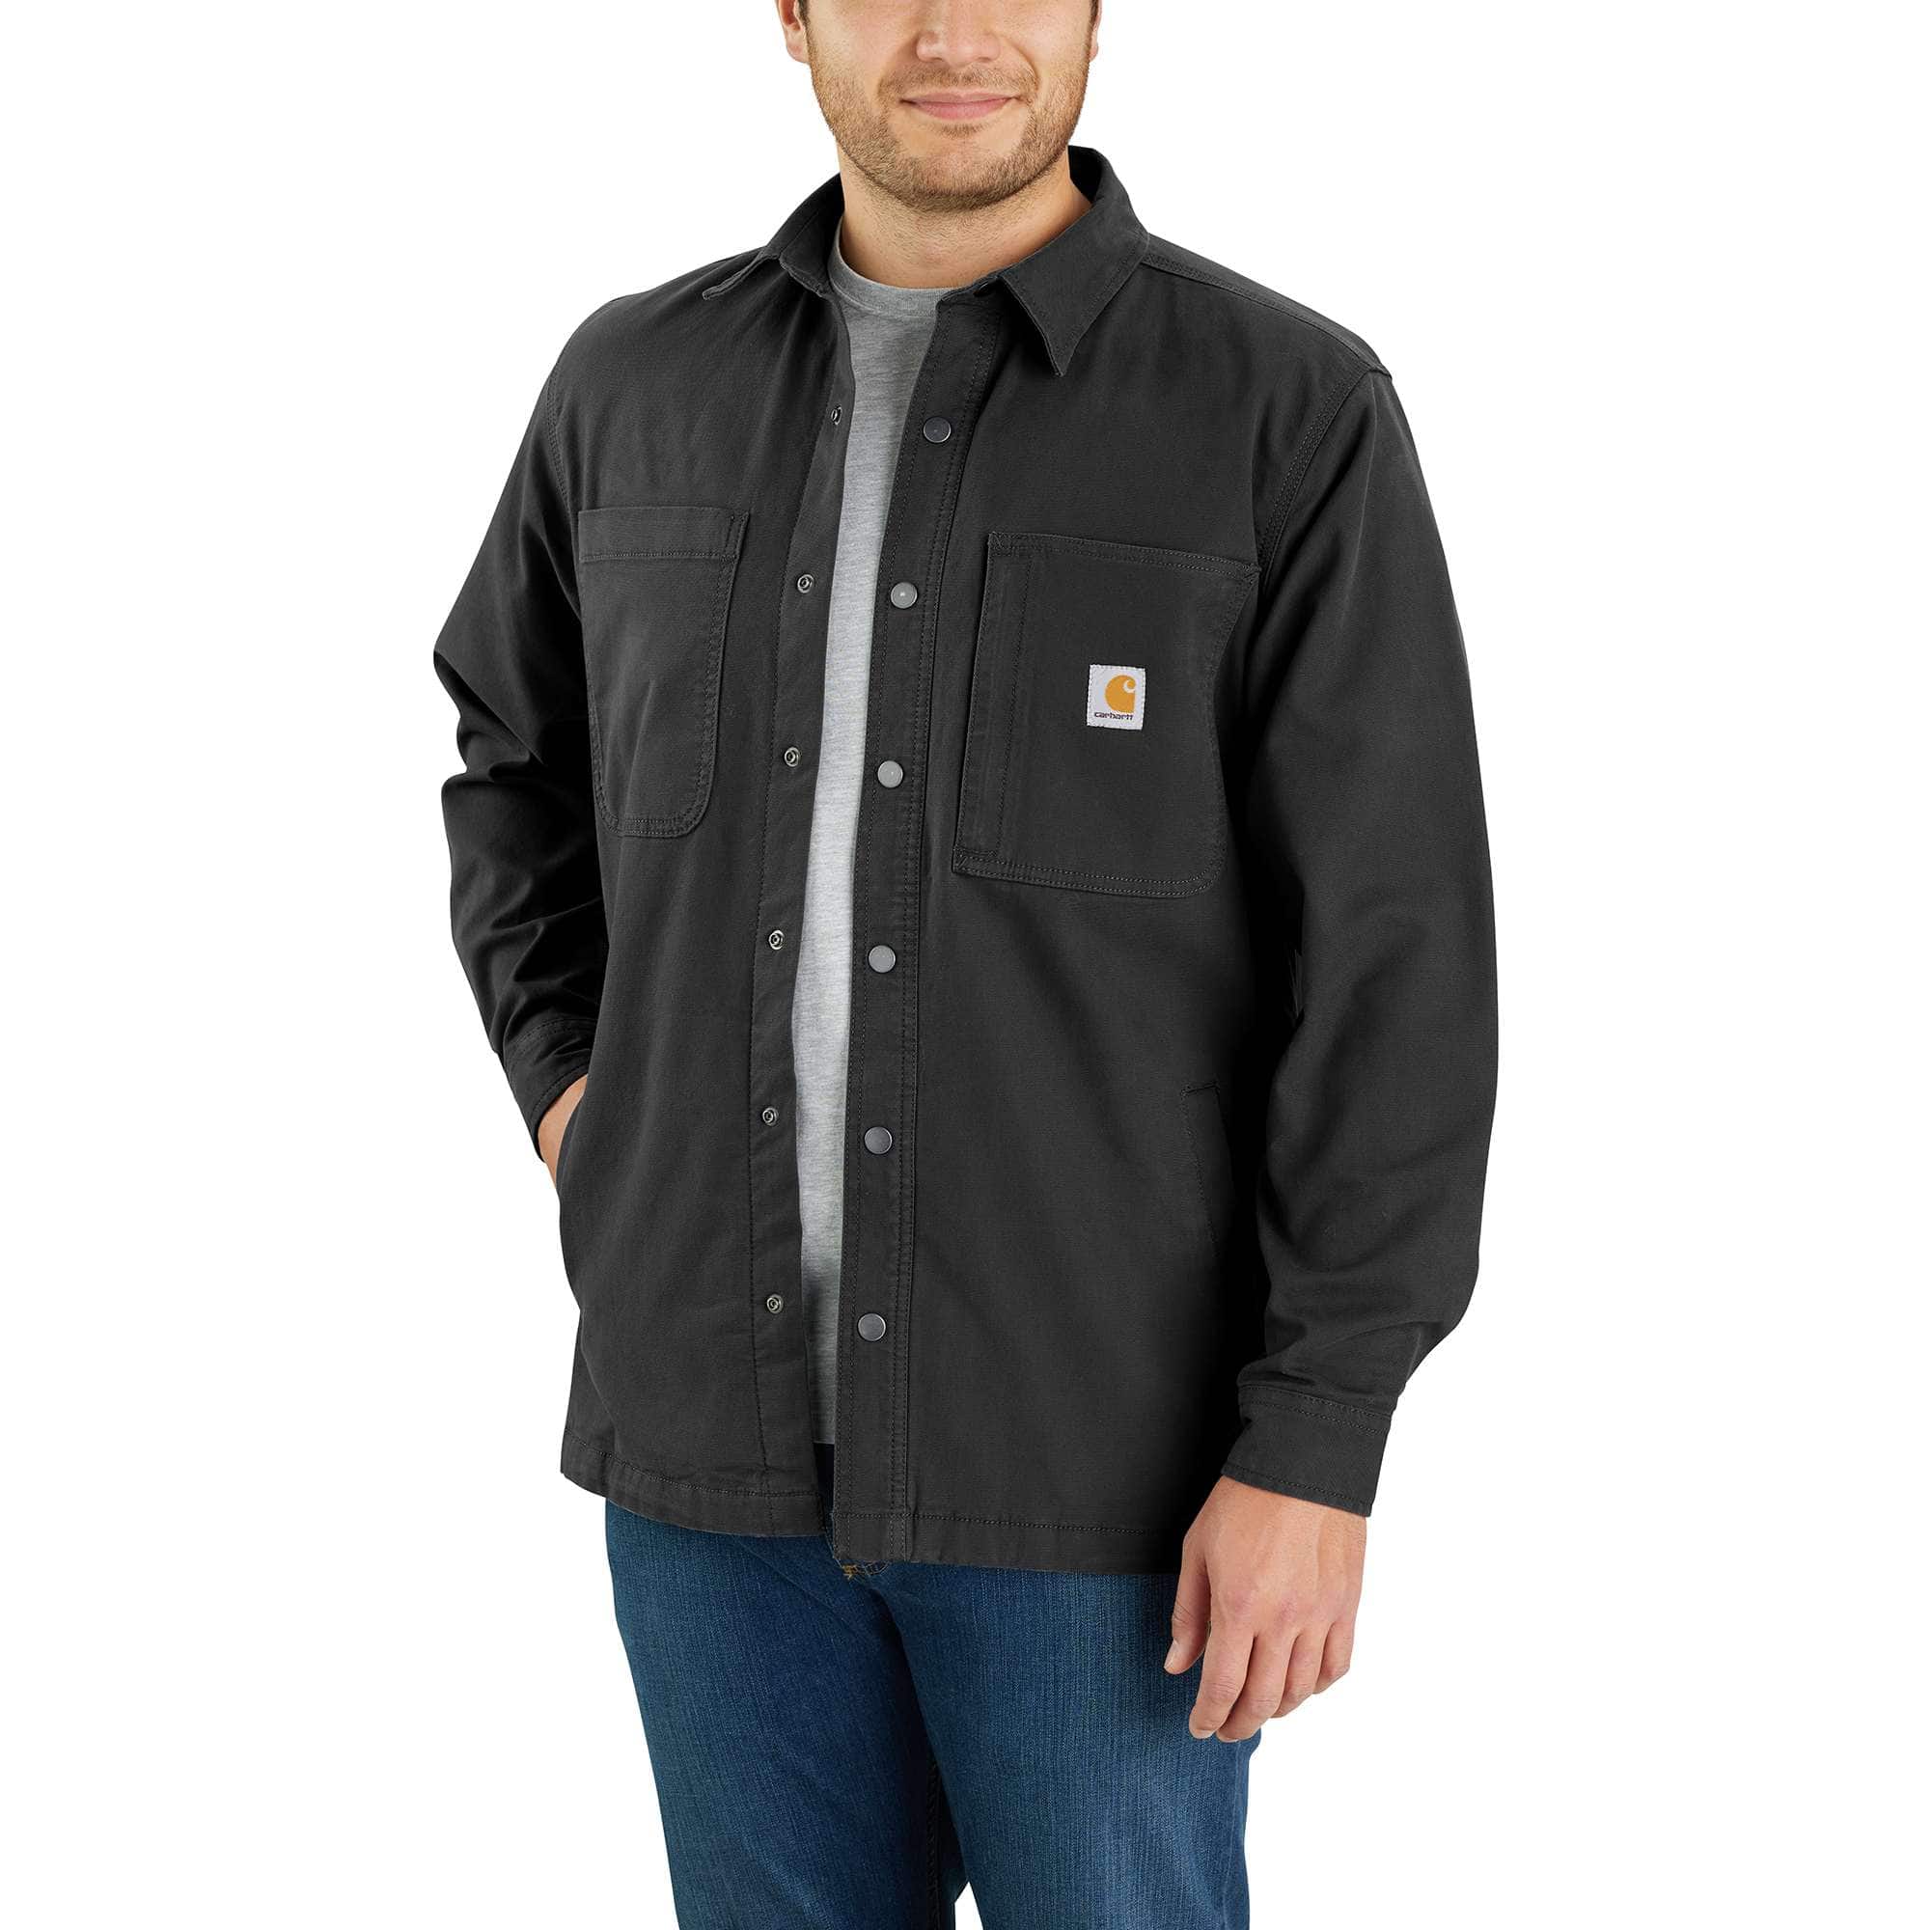 Cold Weather Clothing Essentials, Carhartt